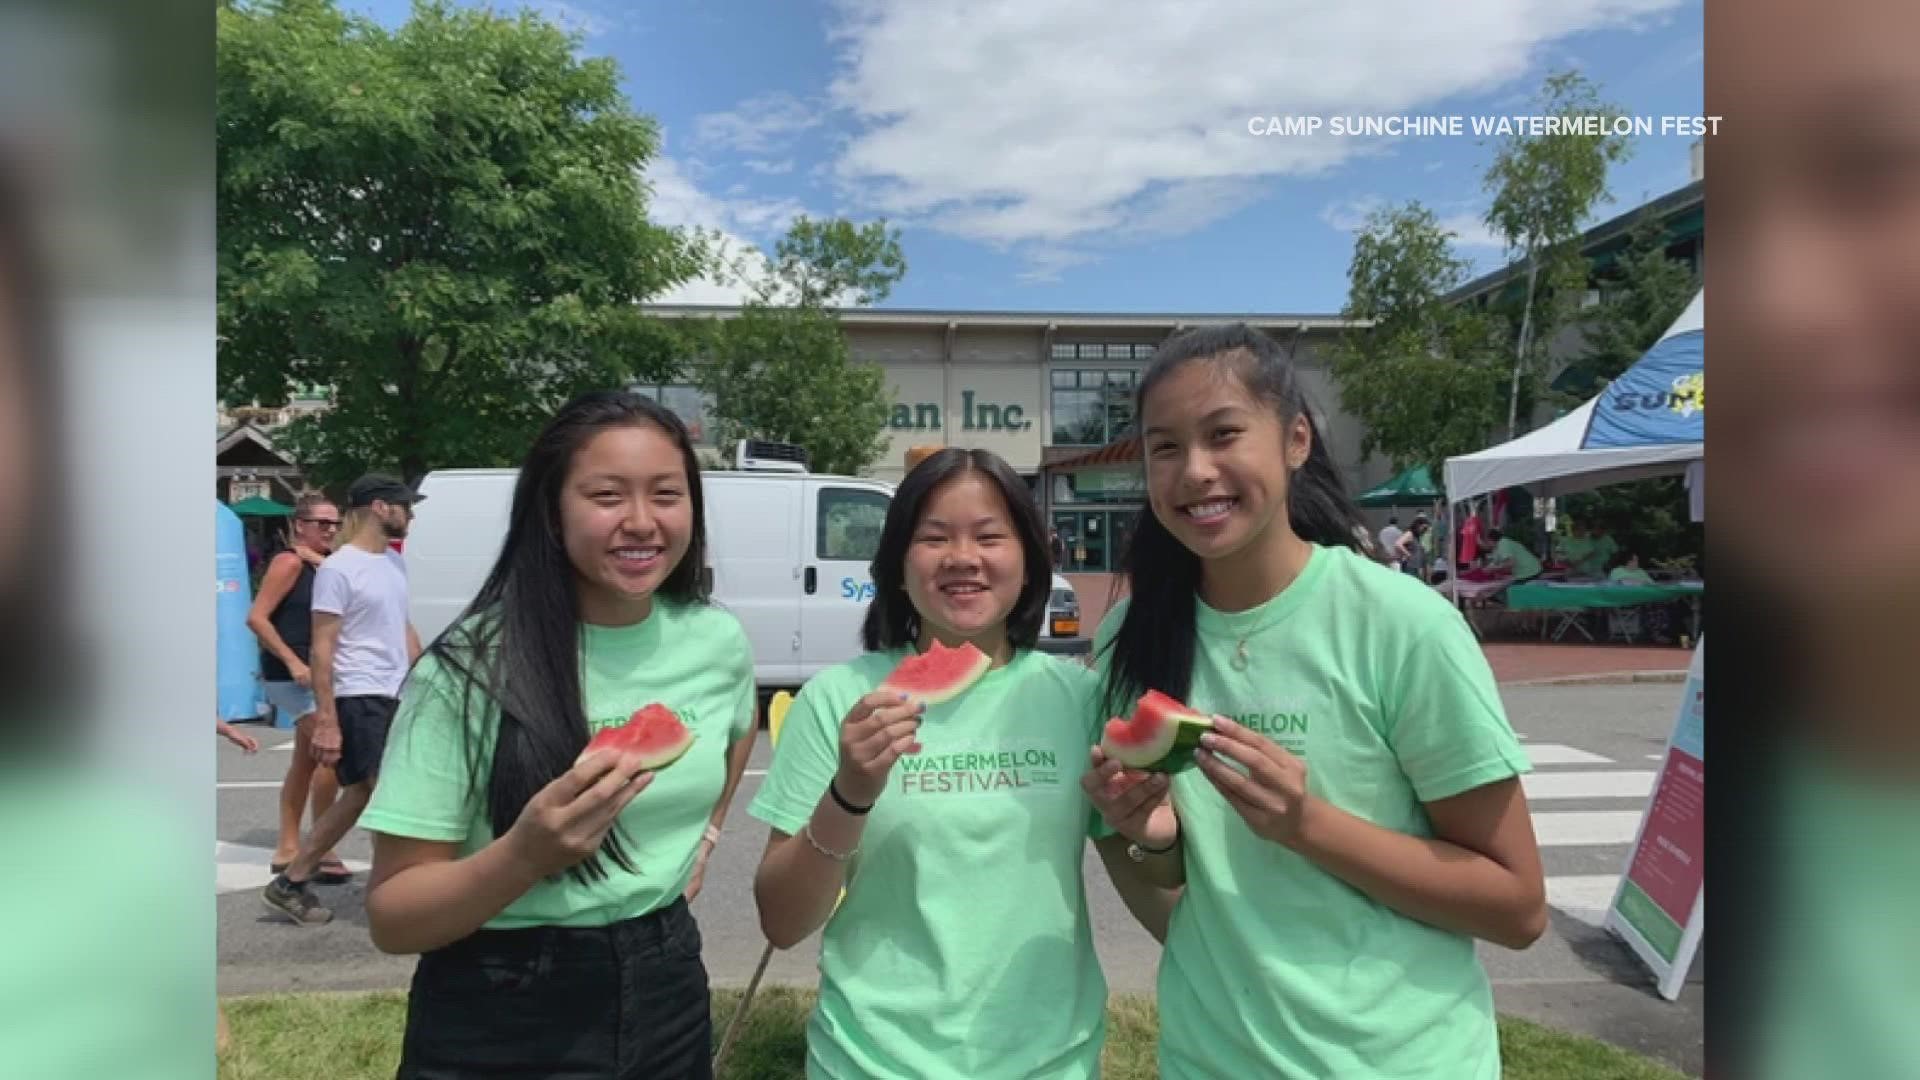 Stop by L.L. Bean in Freeport on Saturday, August 13, for some watermelon fun. All proceeds go to Camp Sunshine.